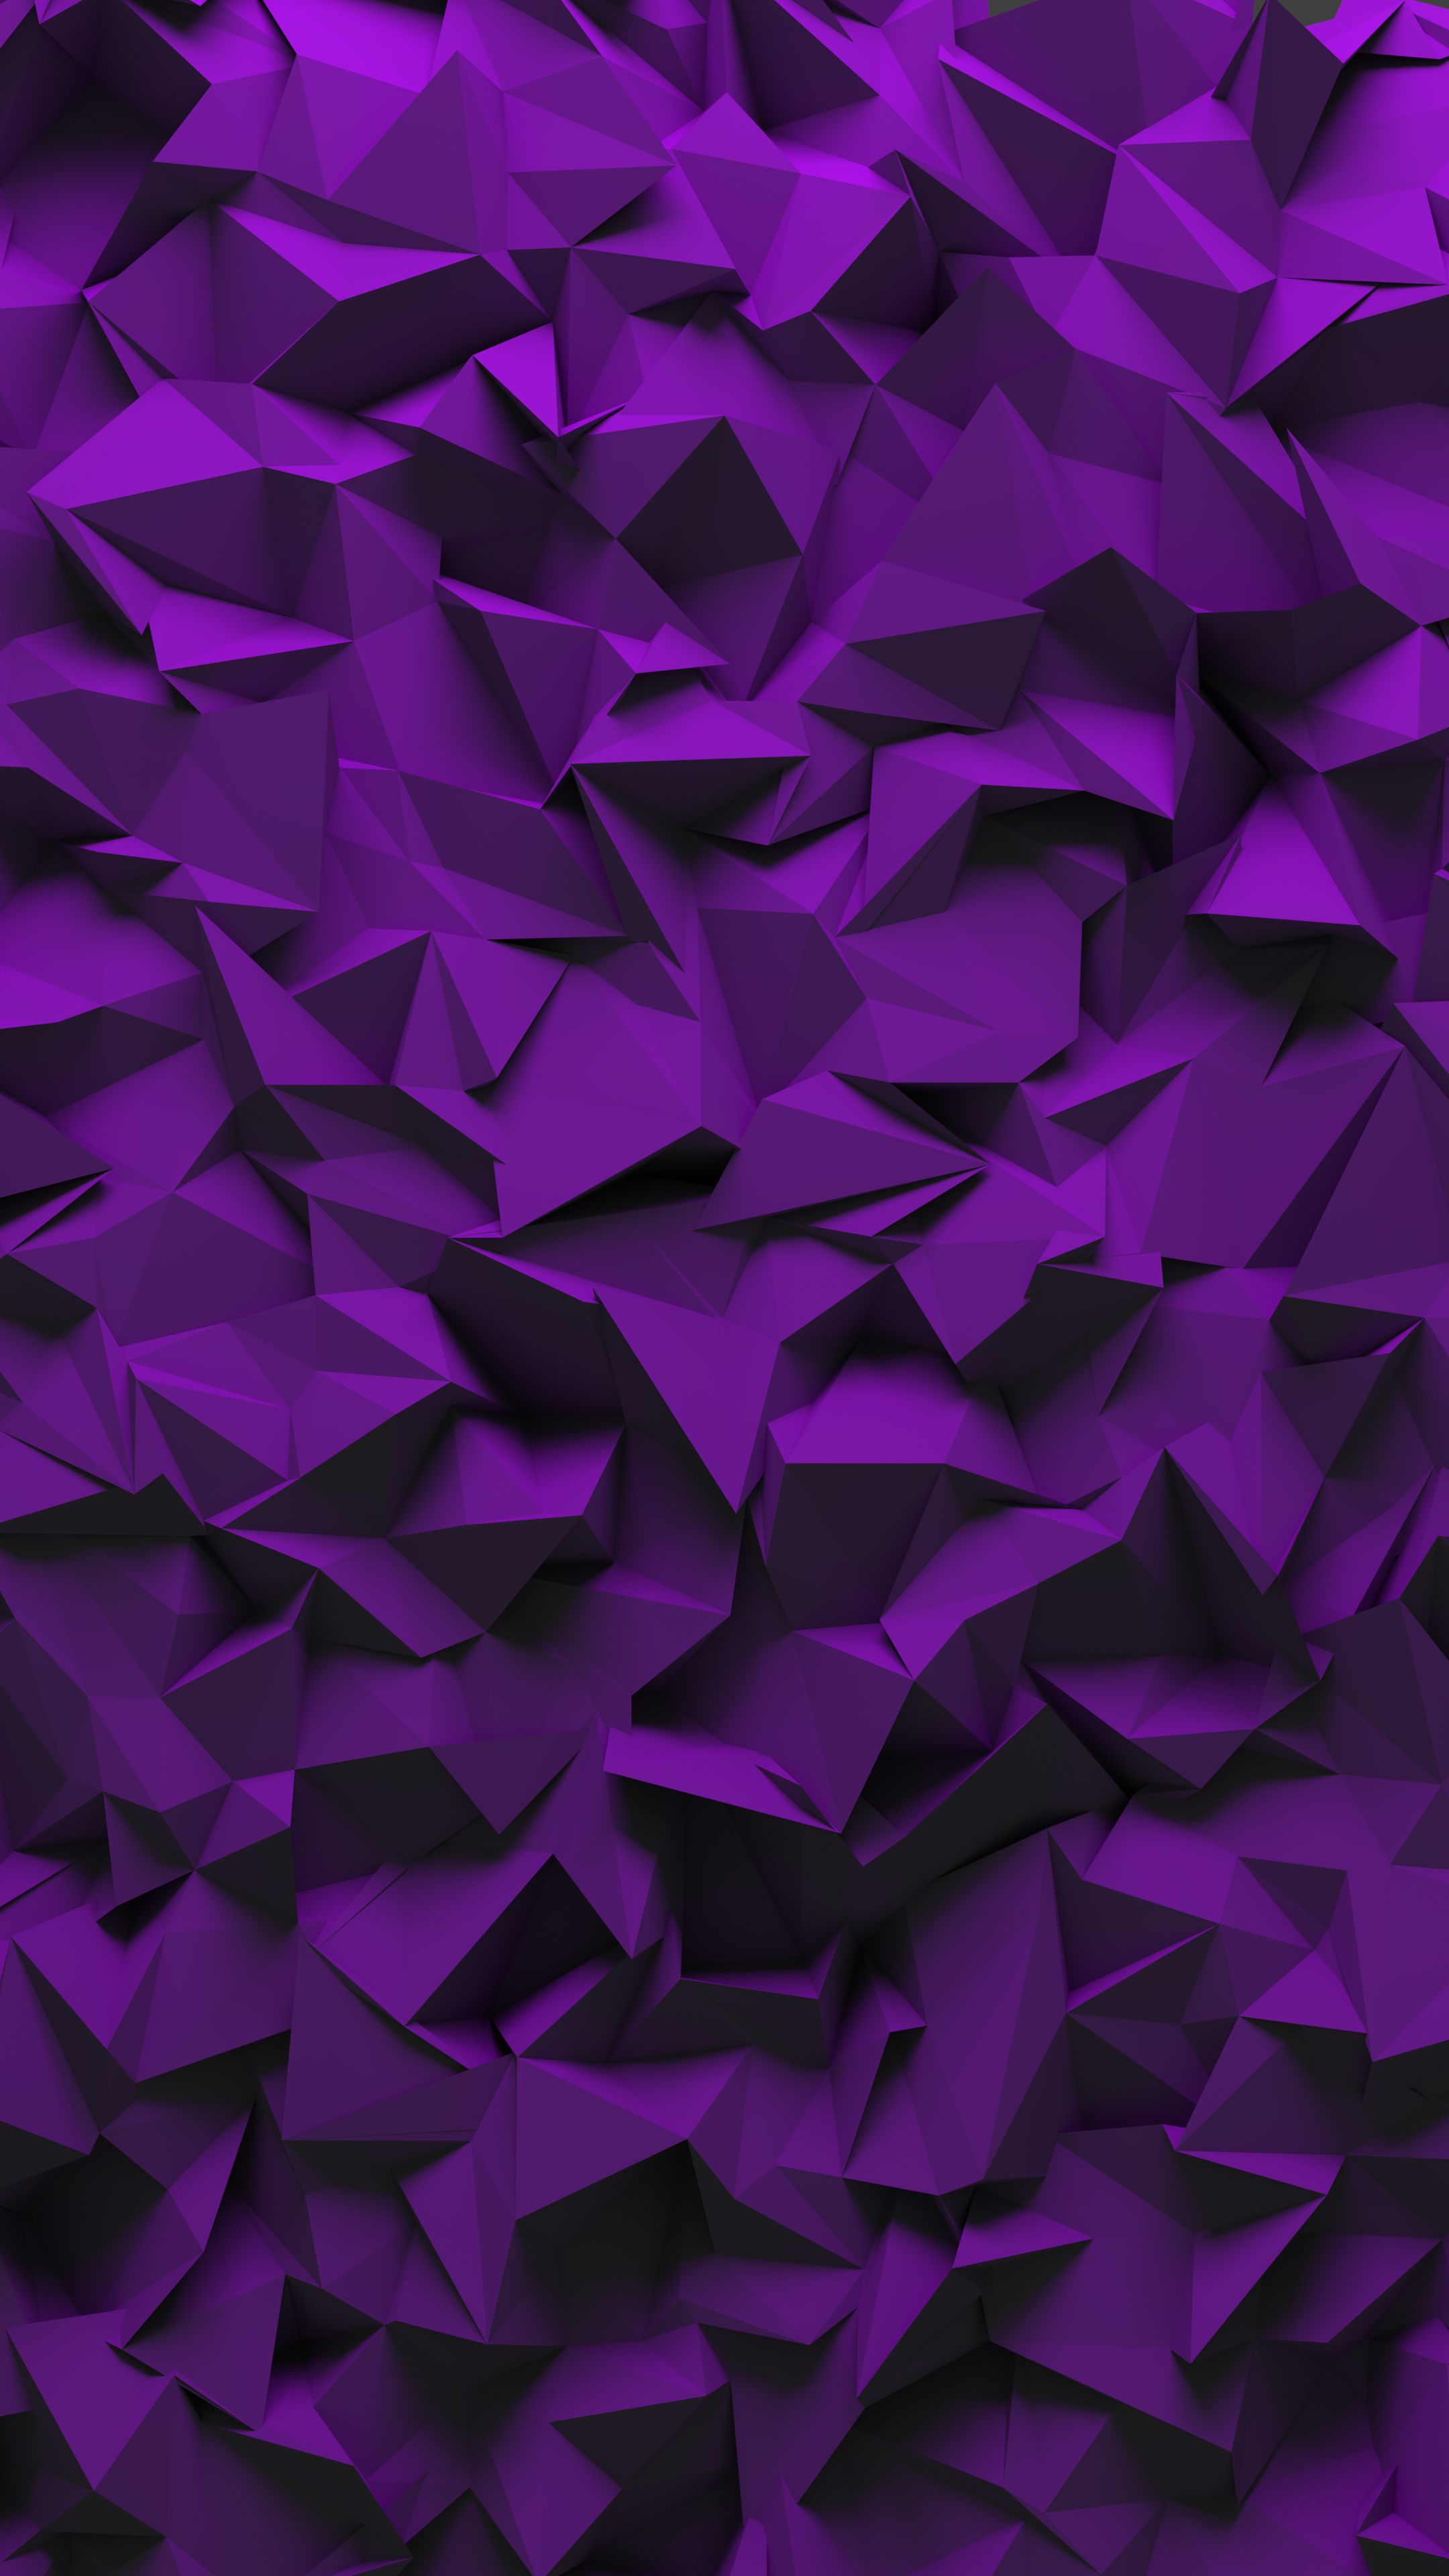 textures, triangles, violet, texture, purple, volume, fragments High Definition image